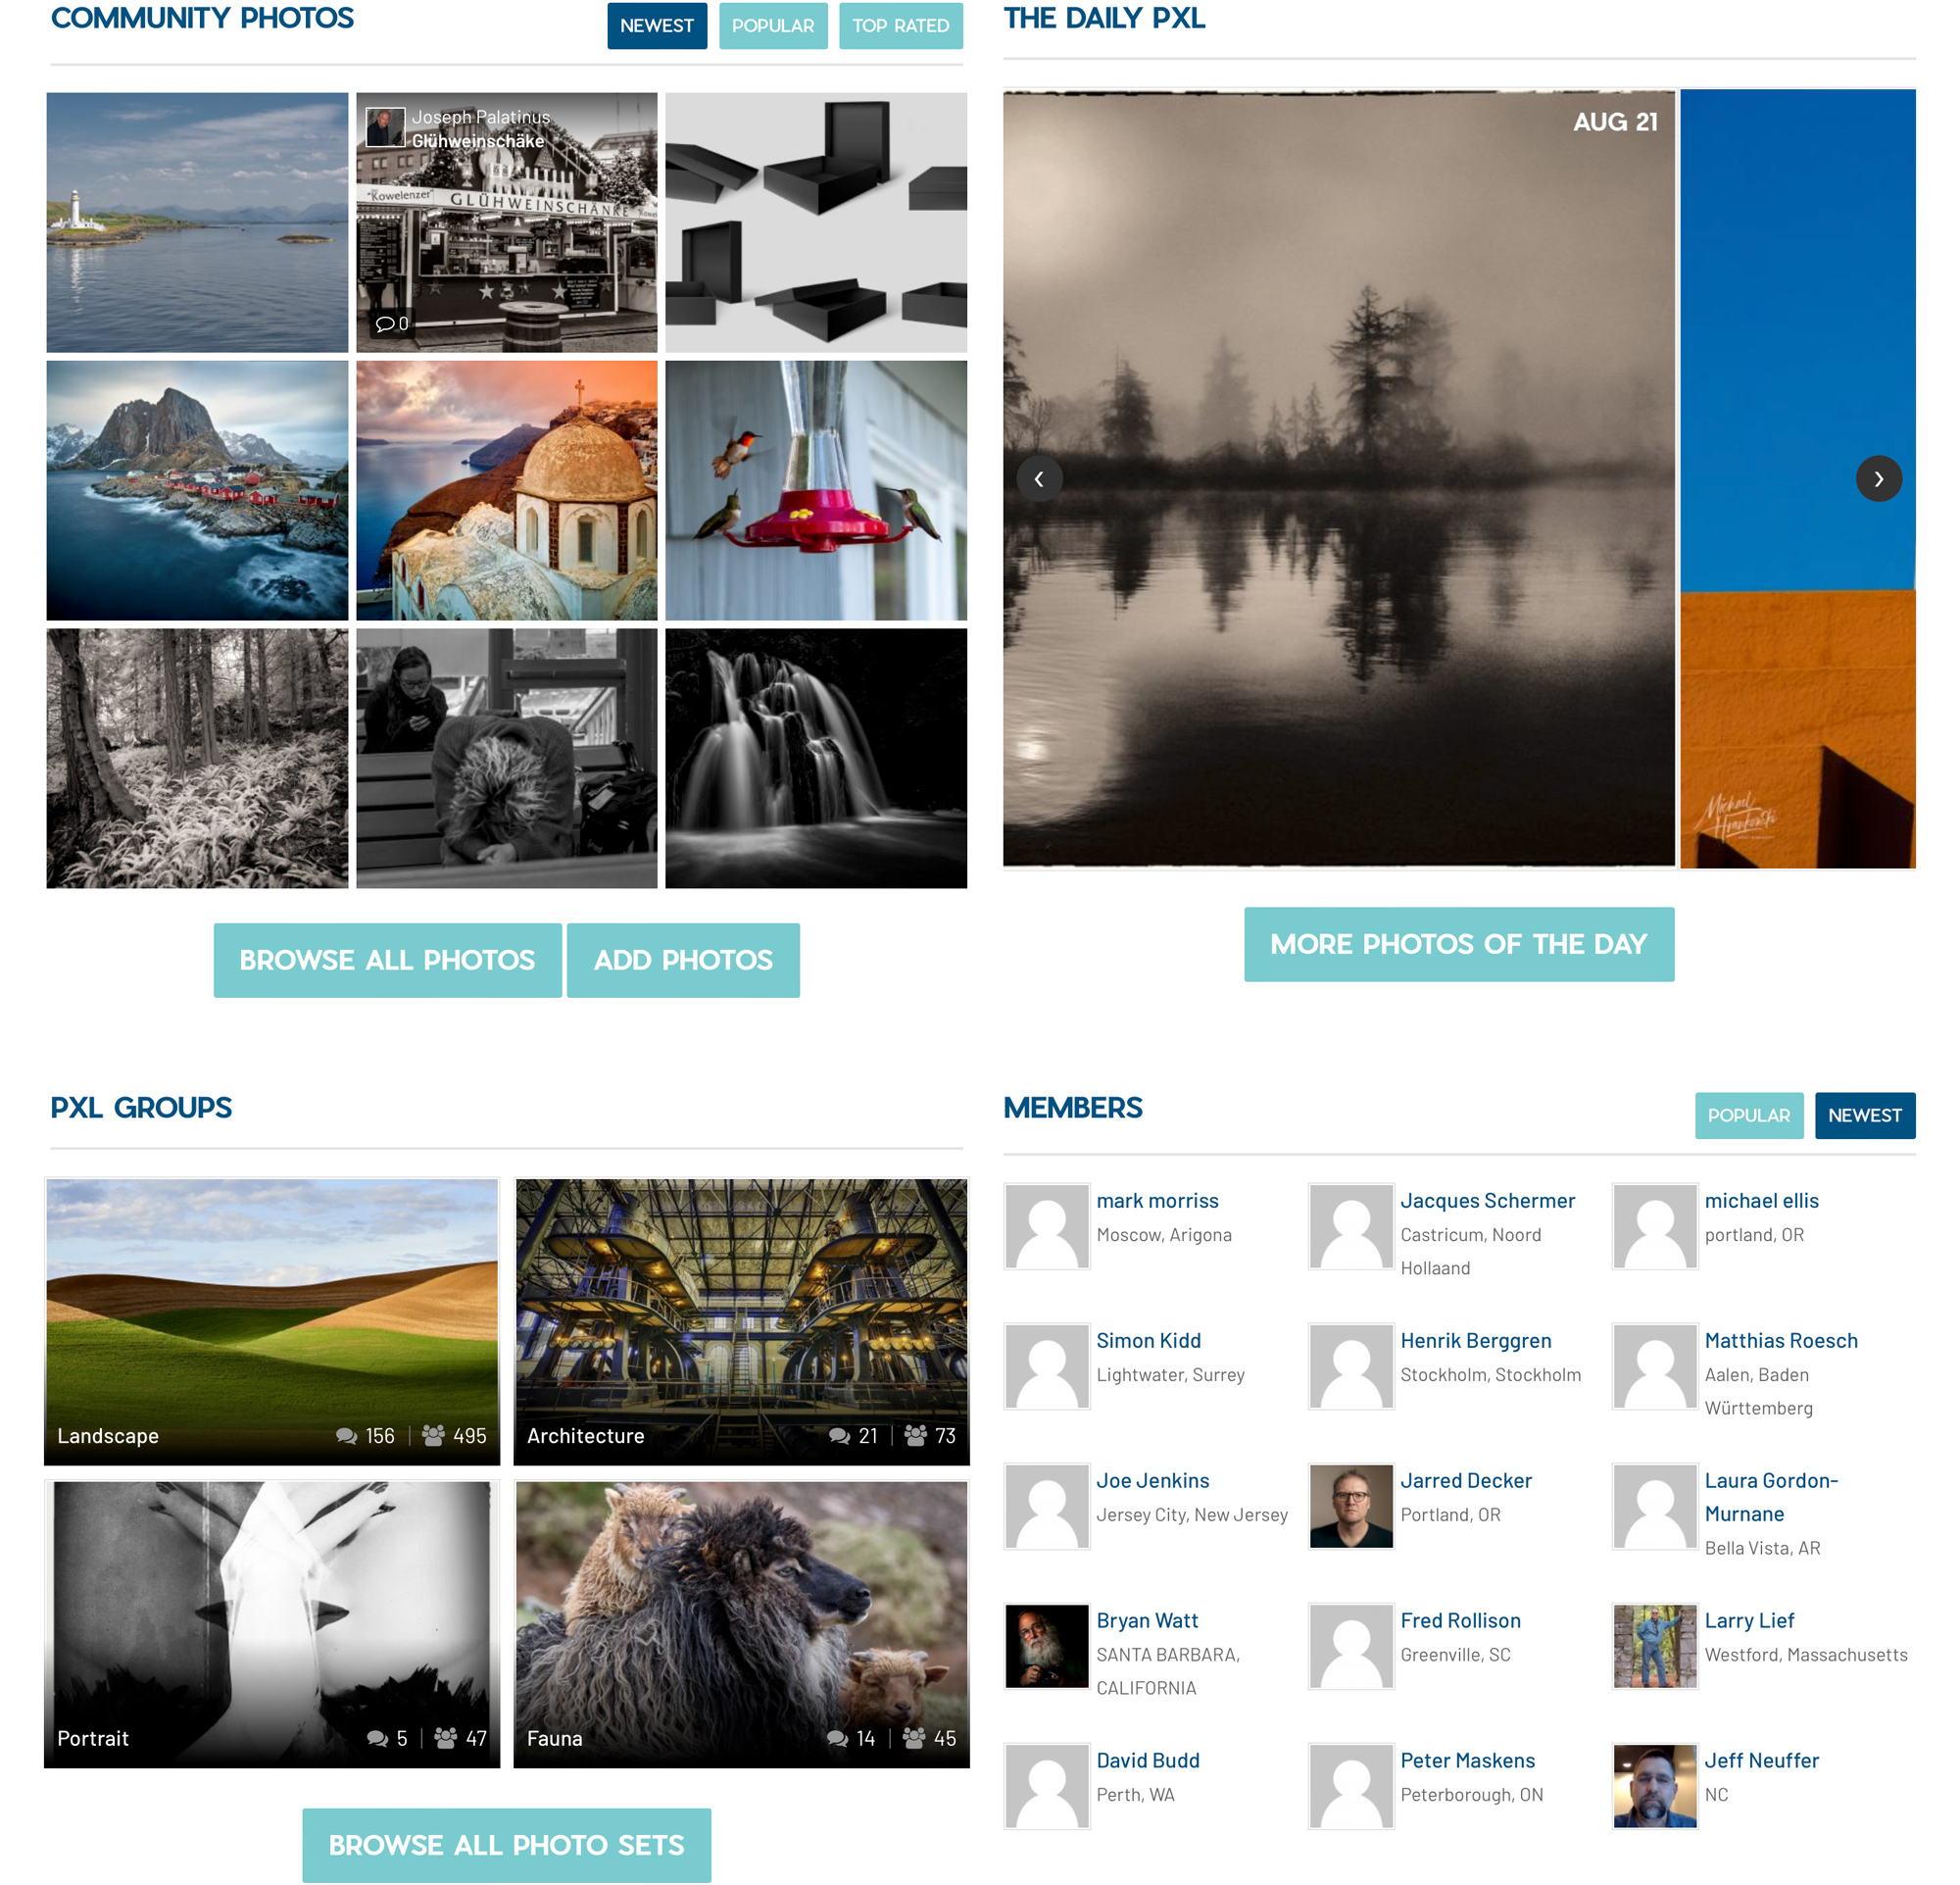 The community page. Check out photographers pages and the members of the site.